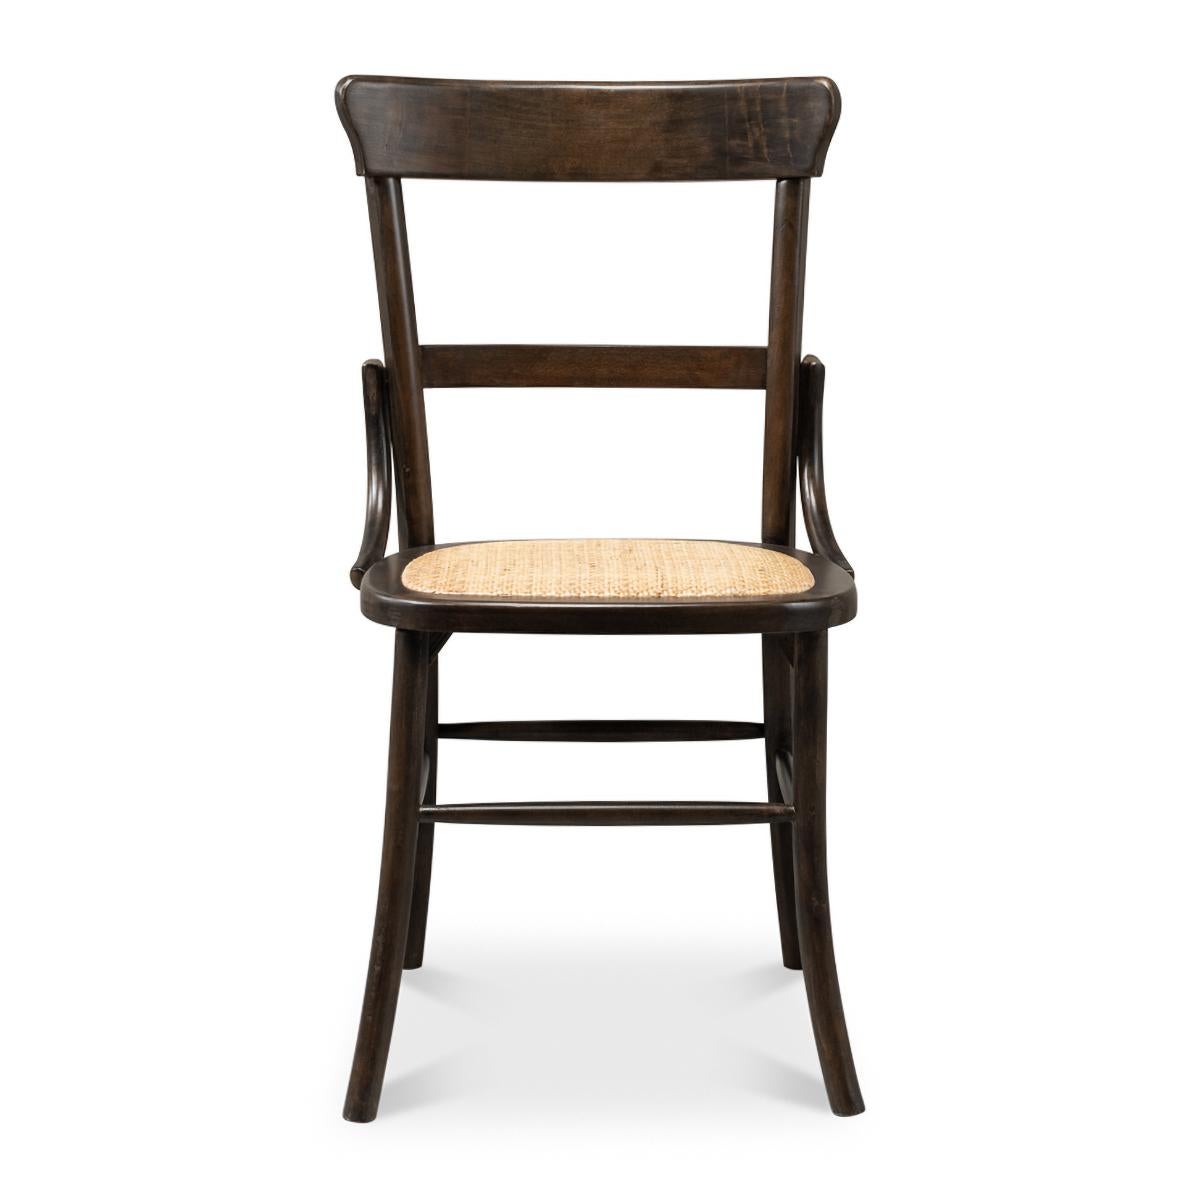 French Bistro Dining Side Chair with a stained maple frame and a rattan insert seat. It speaks to French cafes and a time gone by while constructed and perfectly suited for today's modern living.

Dimensions: 20